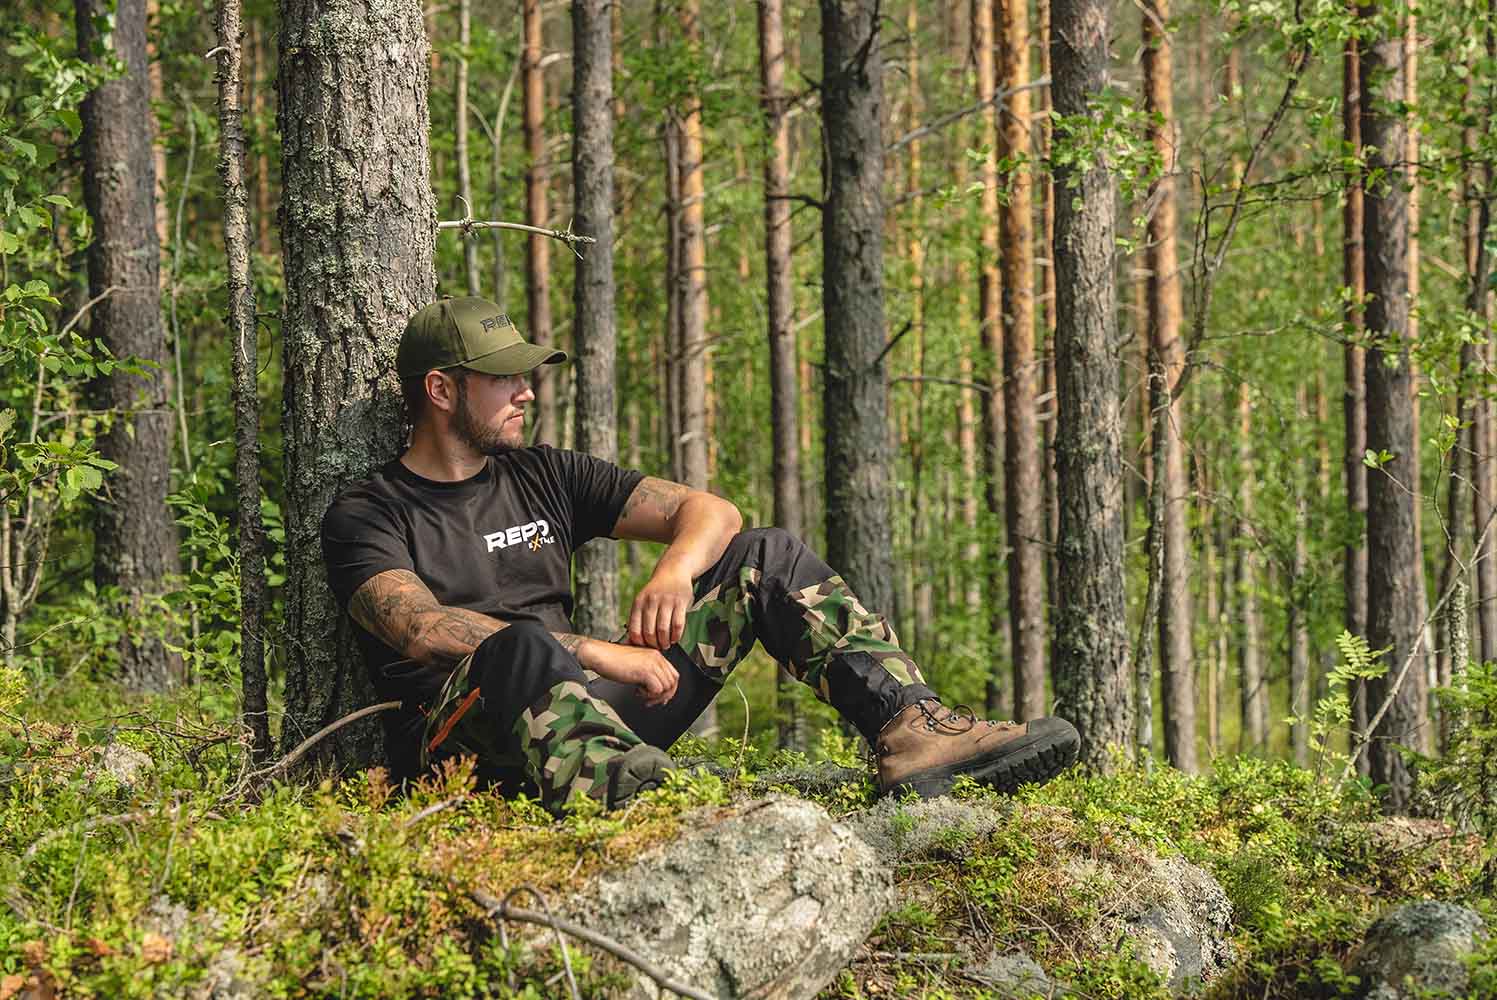 Cap with Repo Extreme embroidered logo and Nokko Camo outdoor trousers